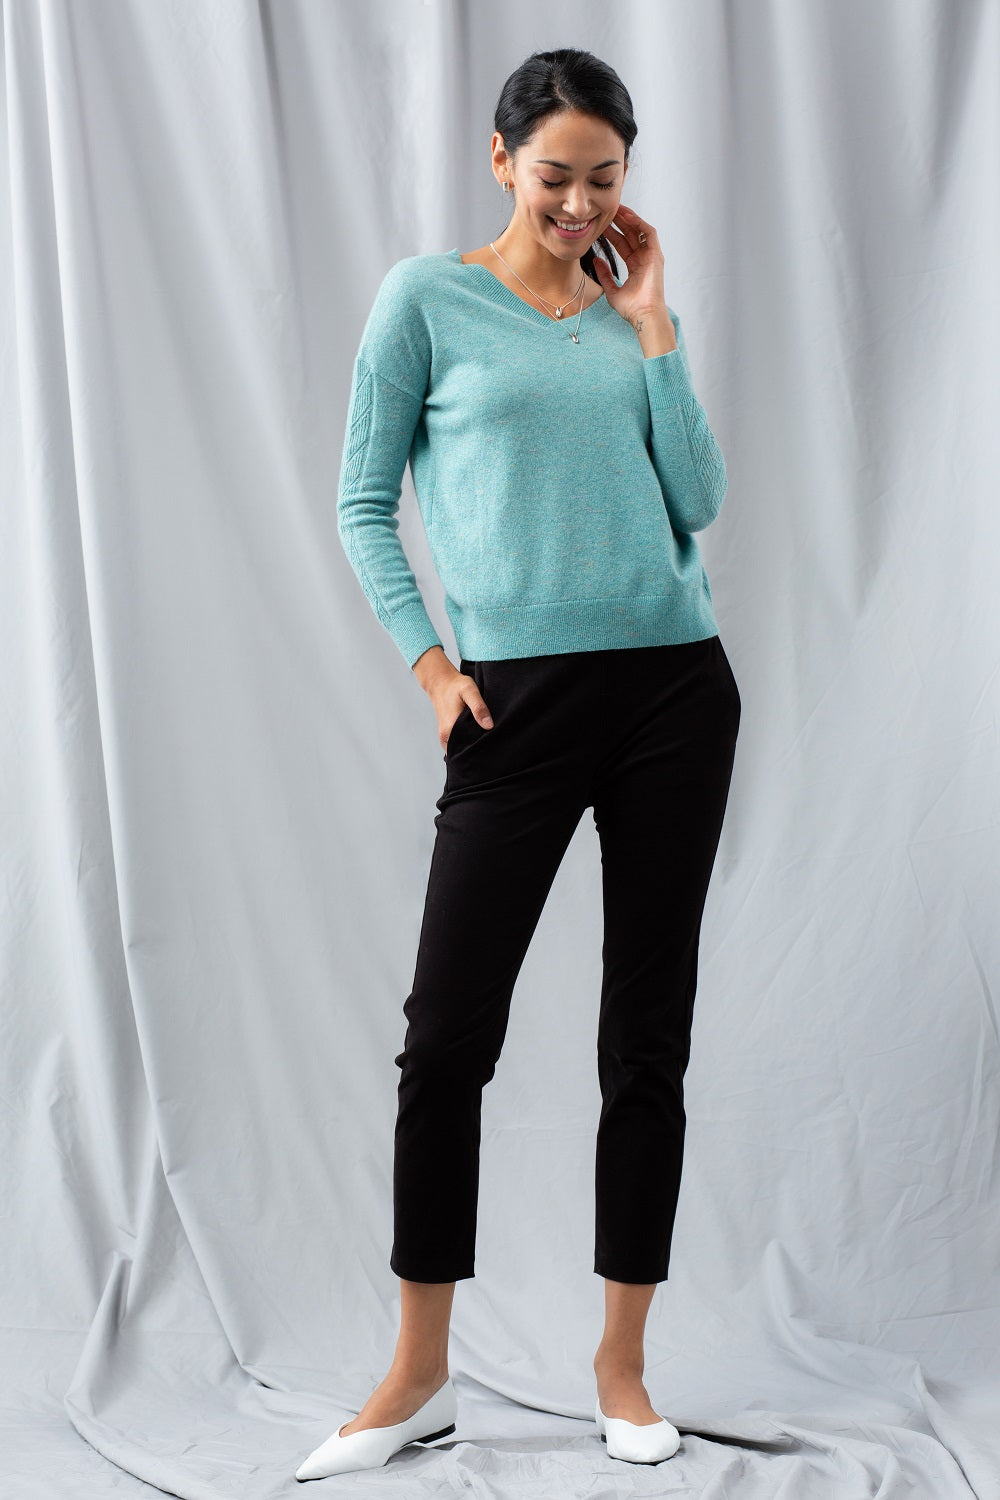 Cable 2-Way Sweater - Winter Jade